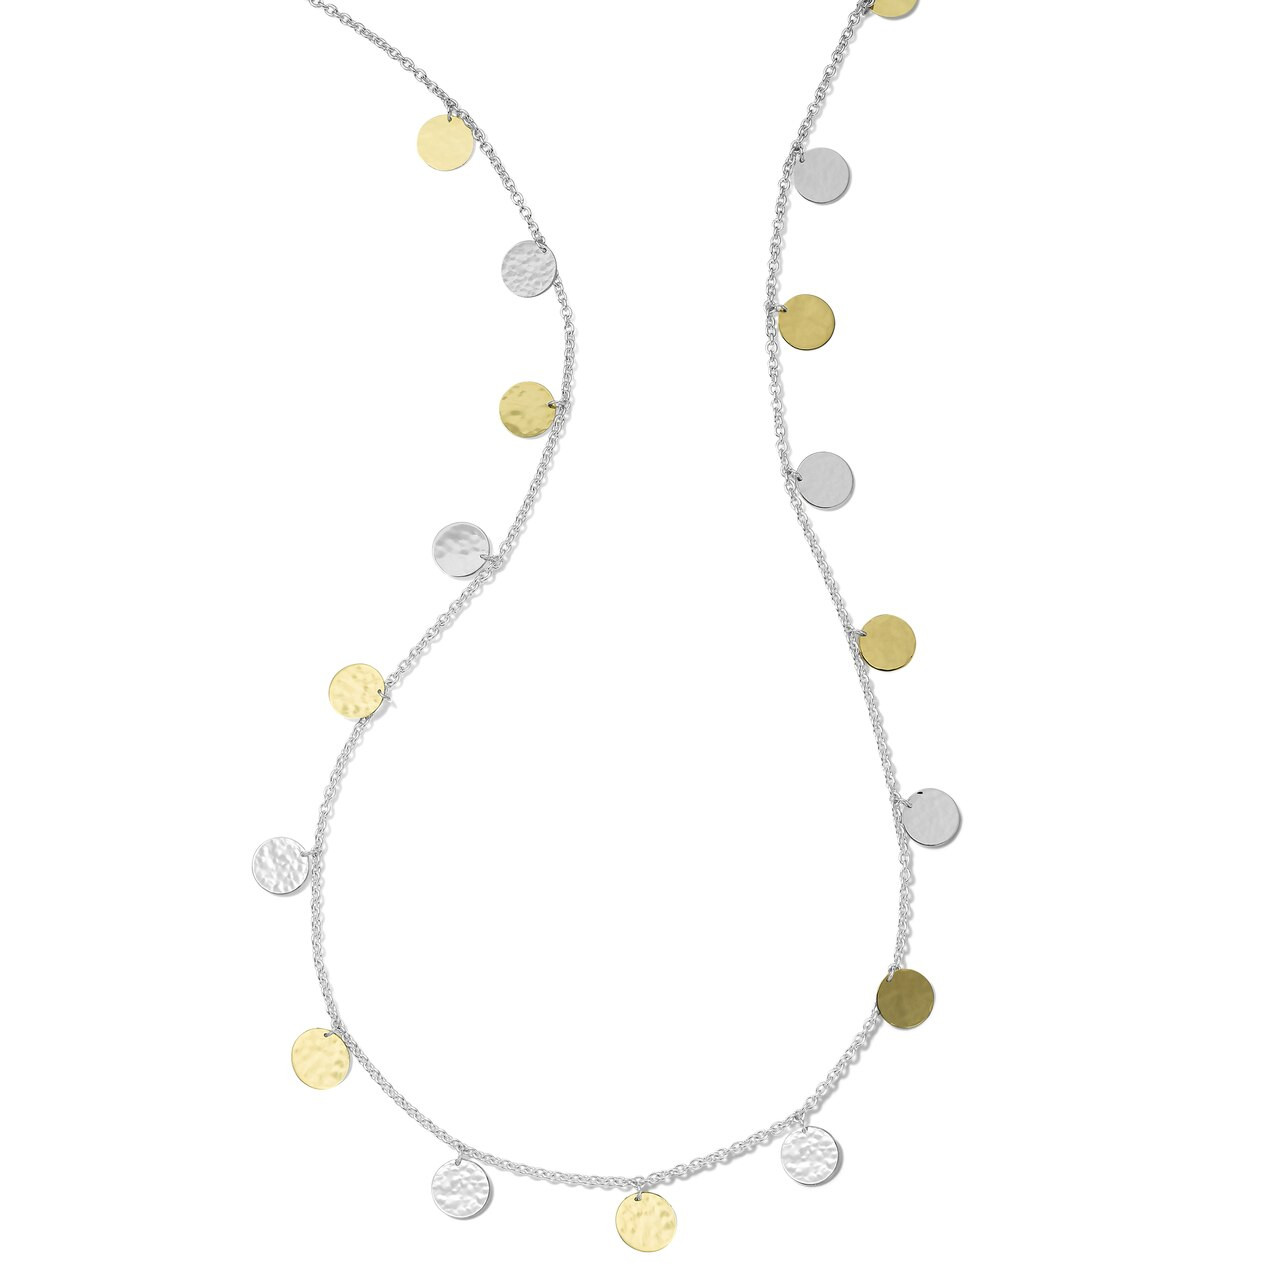 Amazon.com: 14k Hammered Gold Disc Necklace : Handmade Products